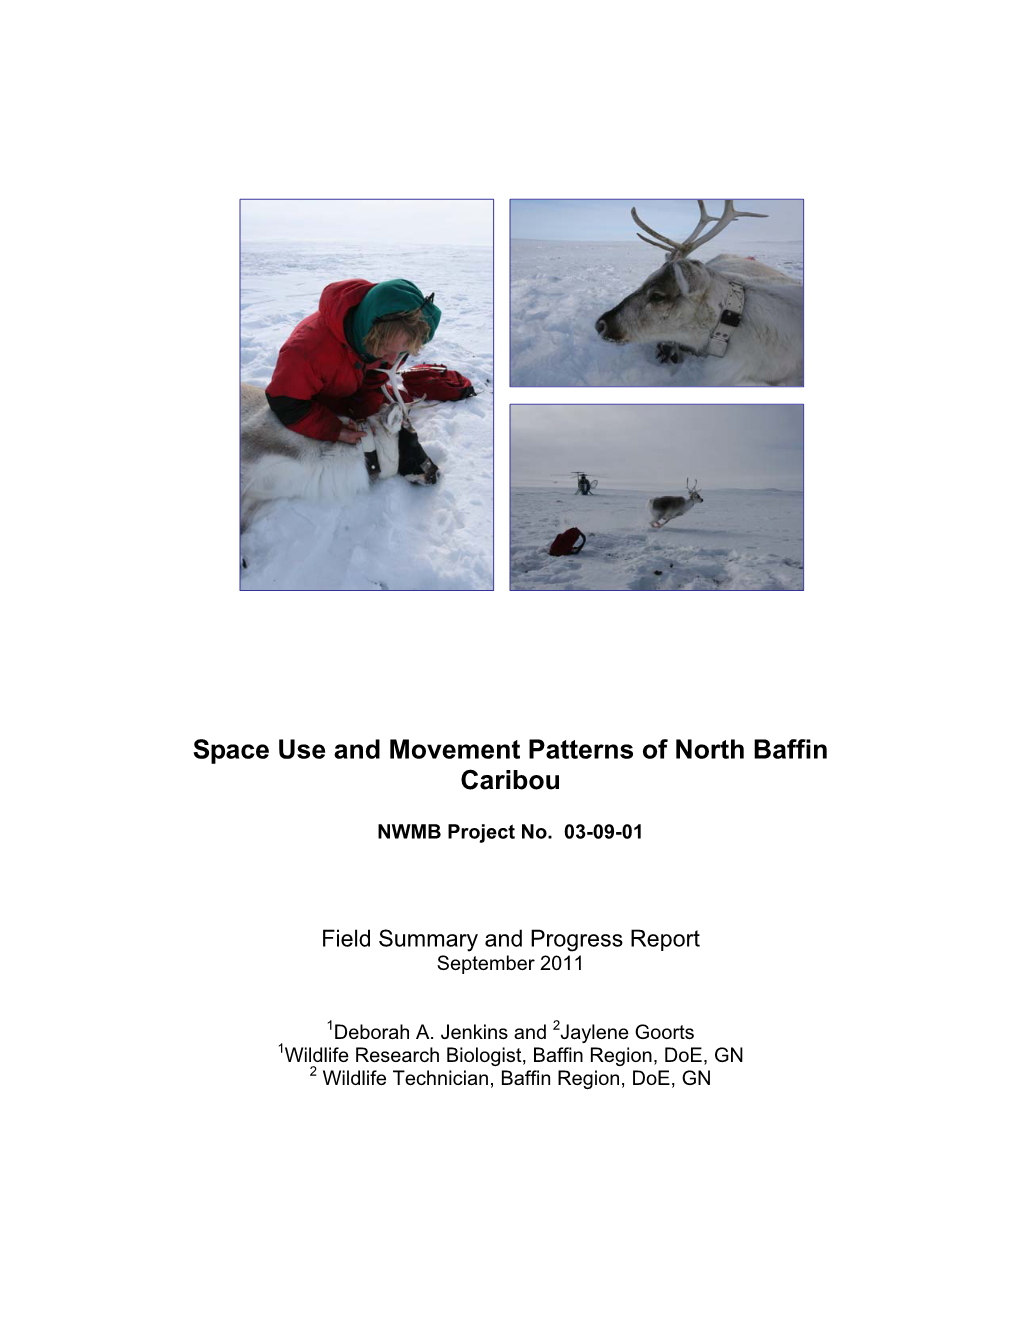 Space Use and Movement Patterns of North Baffin Caribou